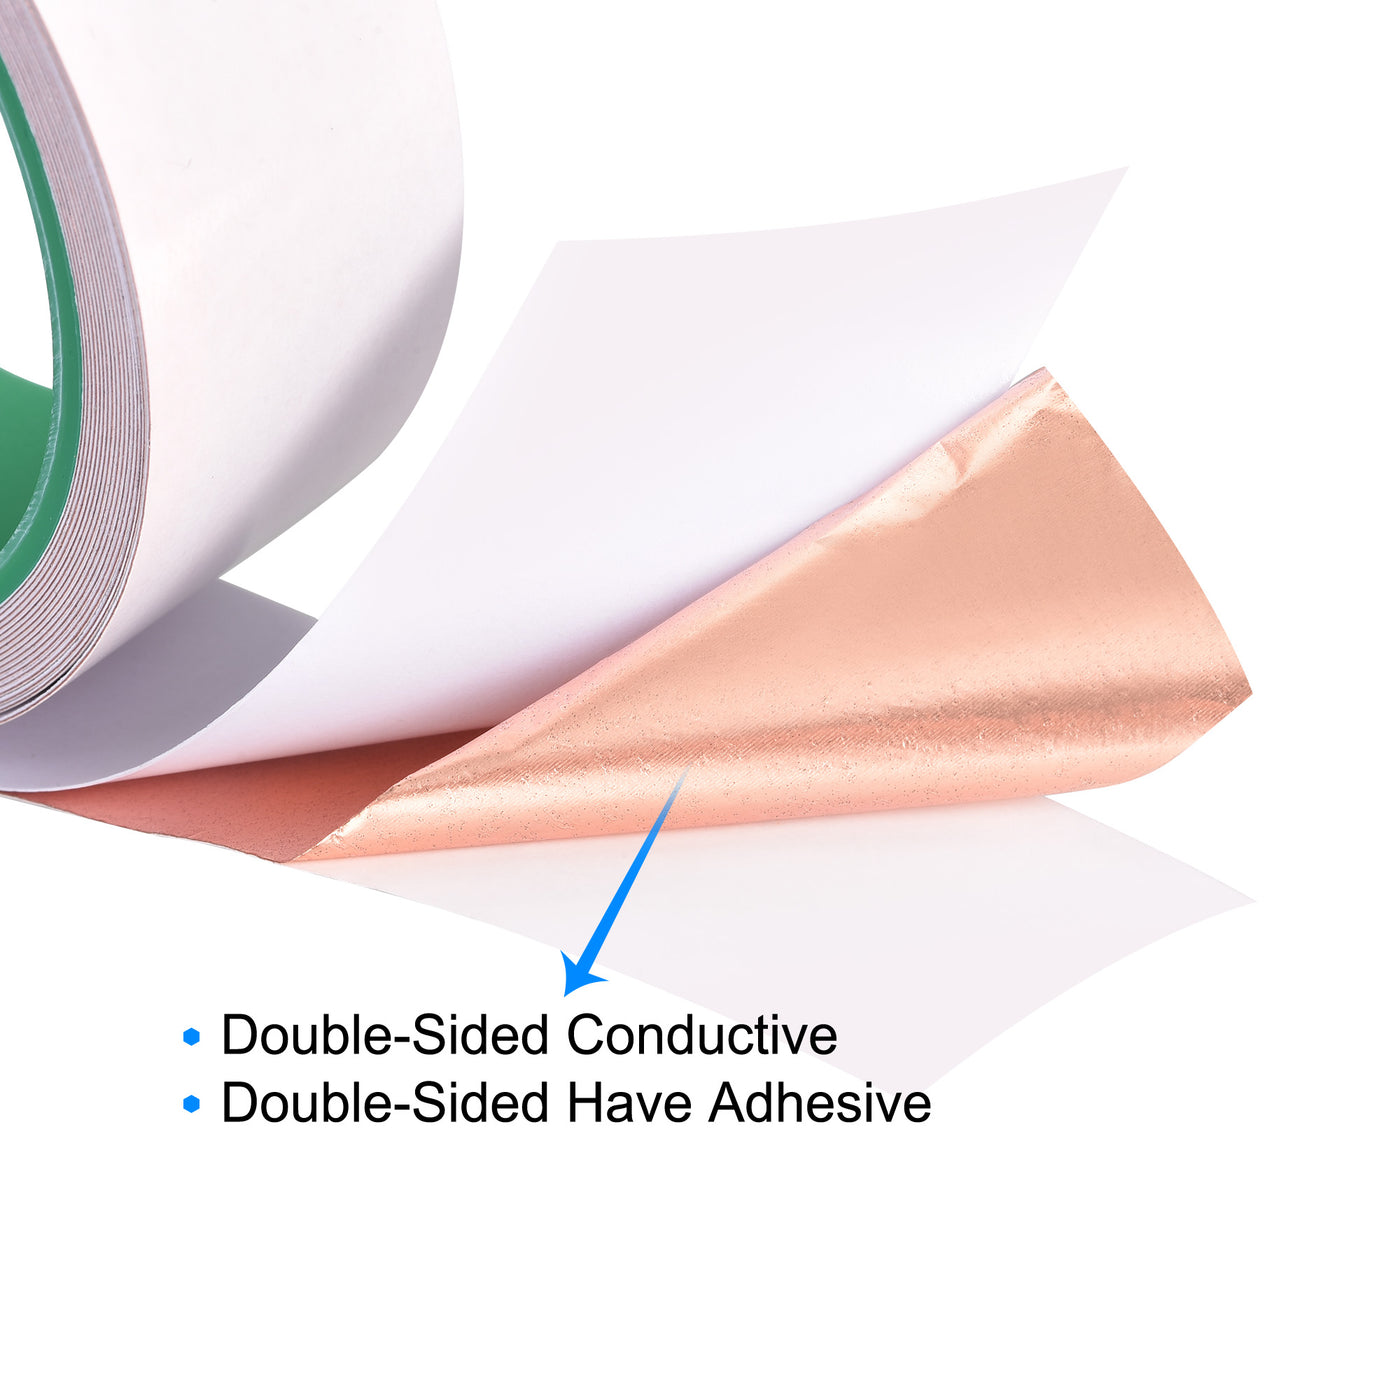 uxcell Uxcell Double-Sided Conductive Tape Copper Foil Tape 30mm x 5m/16.4ft for EMI Shielding 1pcs